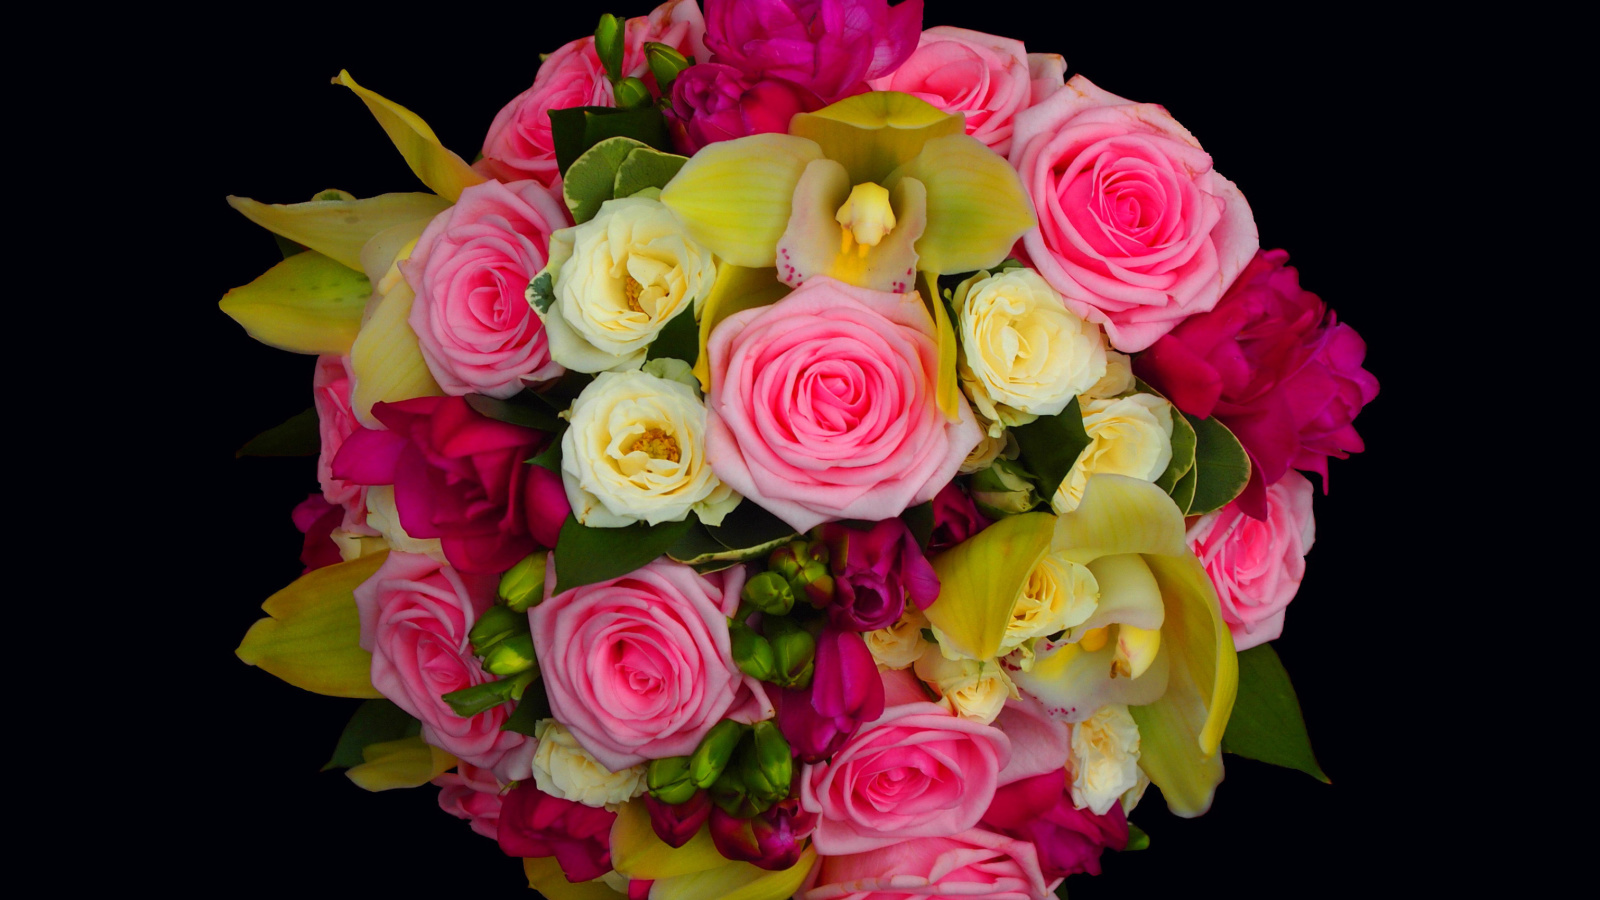 Bouquet of roses and yellow orchid, floristry screenshot #1 1600x900